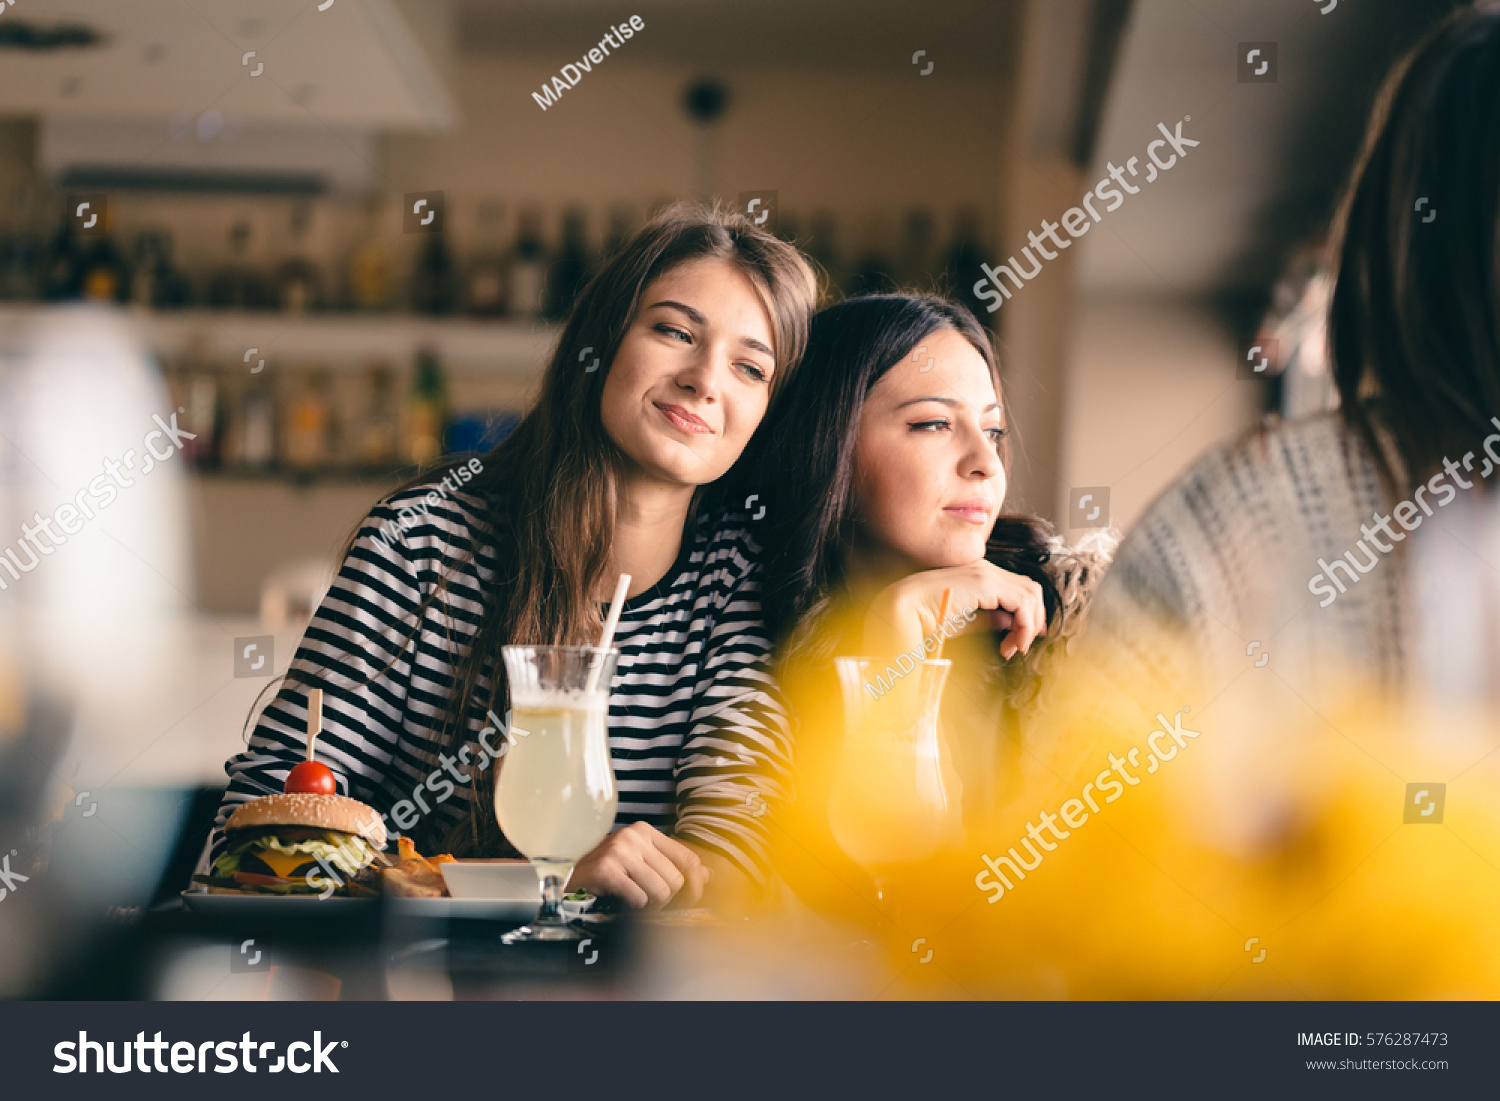 Old friends meeting up after long time for drinks and eating, talking about their memories. Girlfriends showing signs of affection, reliving beautiful moments from the past, being happy. #576287473